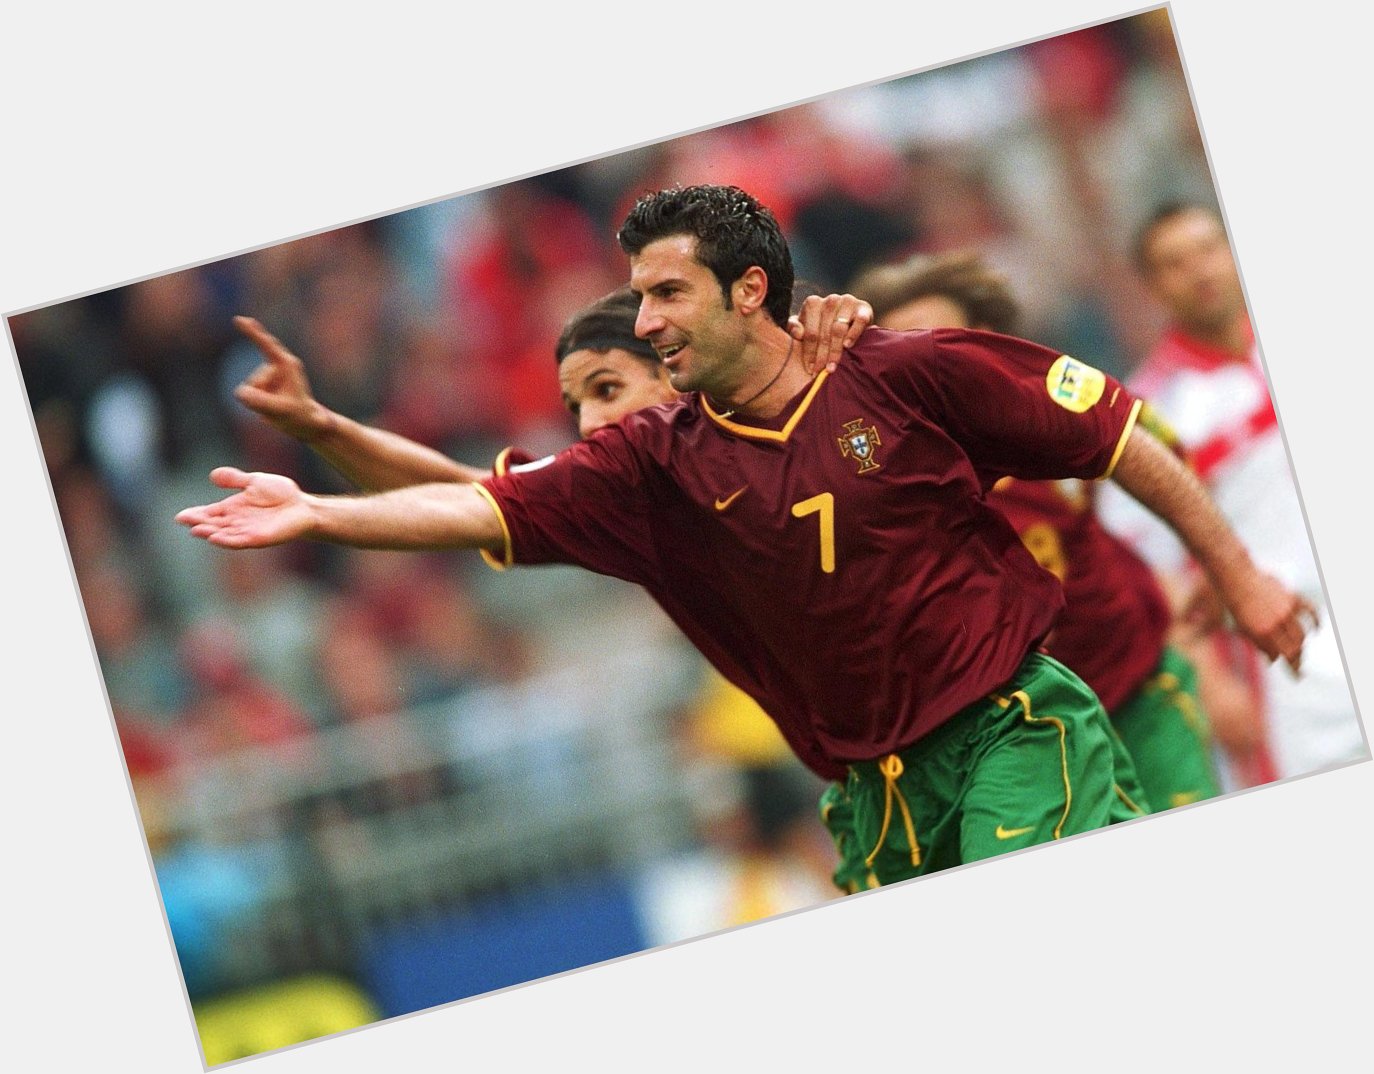 Happy birthday to Portugal\s original number 7 Luis Figo.

The 2000 Ballon D\Or winner turns 45 today. 